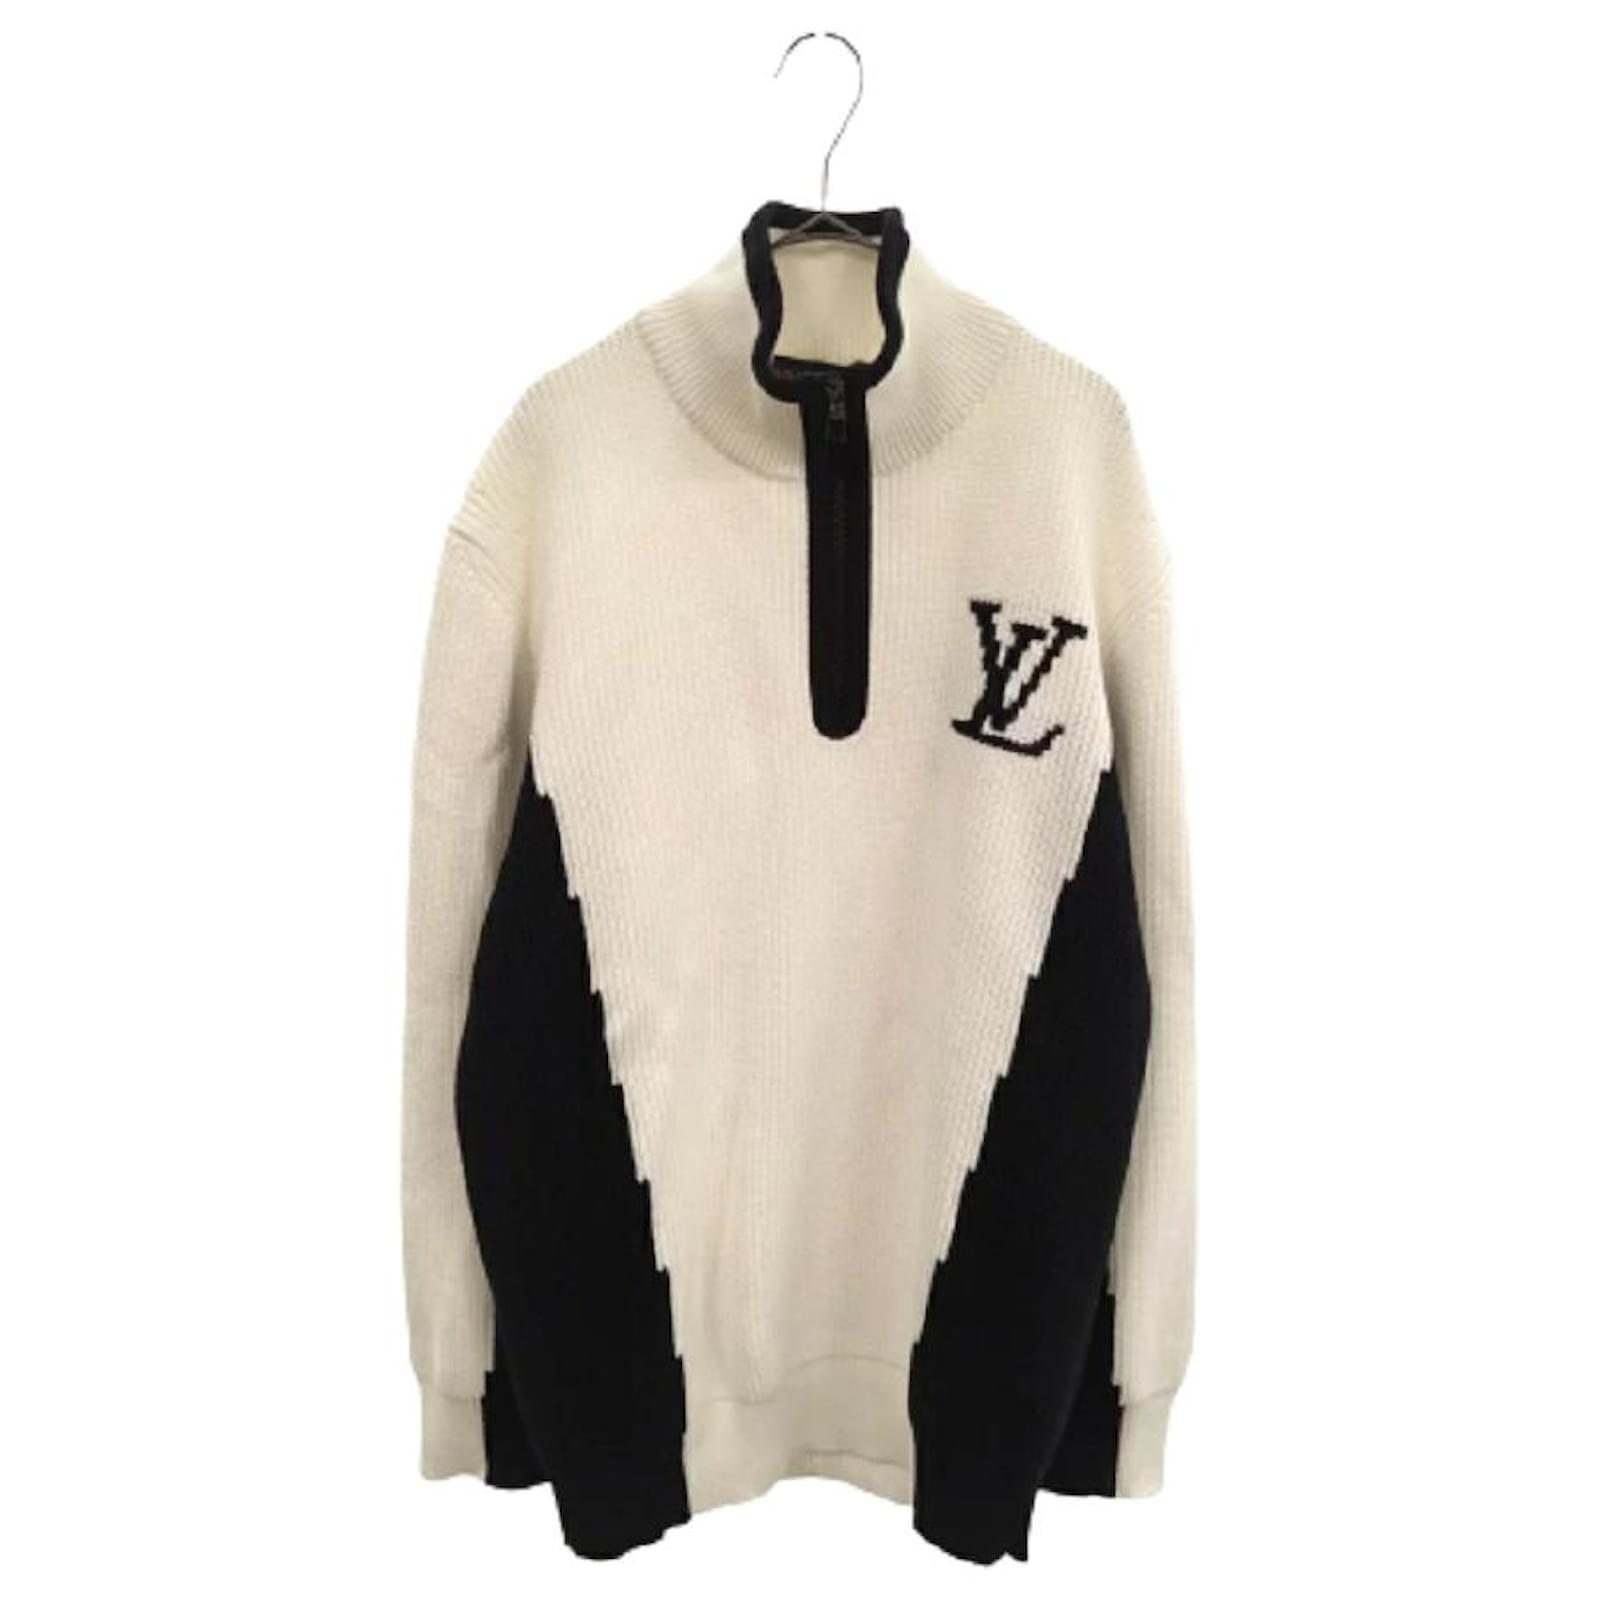 image therapy — Louis Vuitton: 'Clock' Wool Knit Sweater (2021)